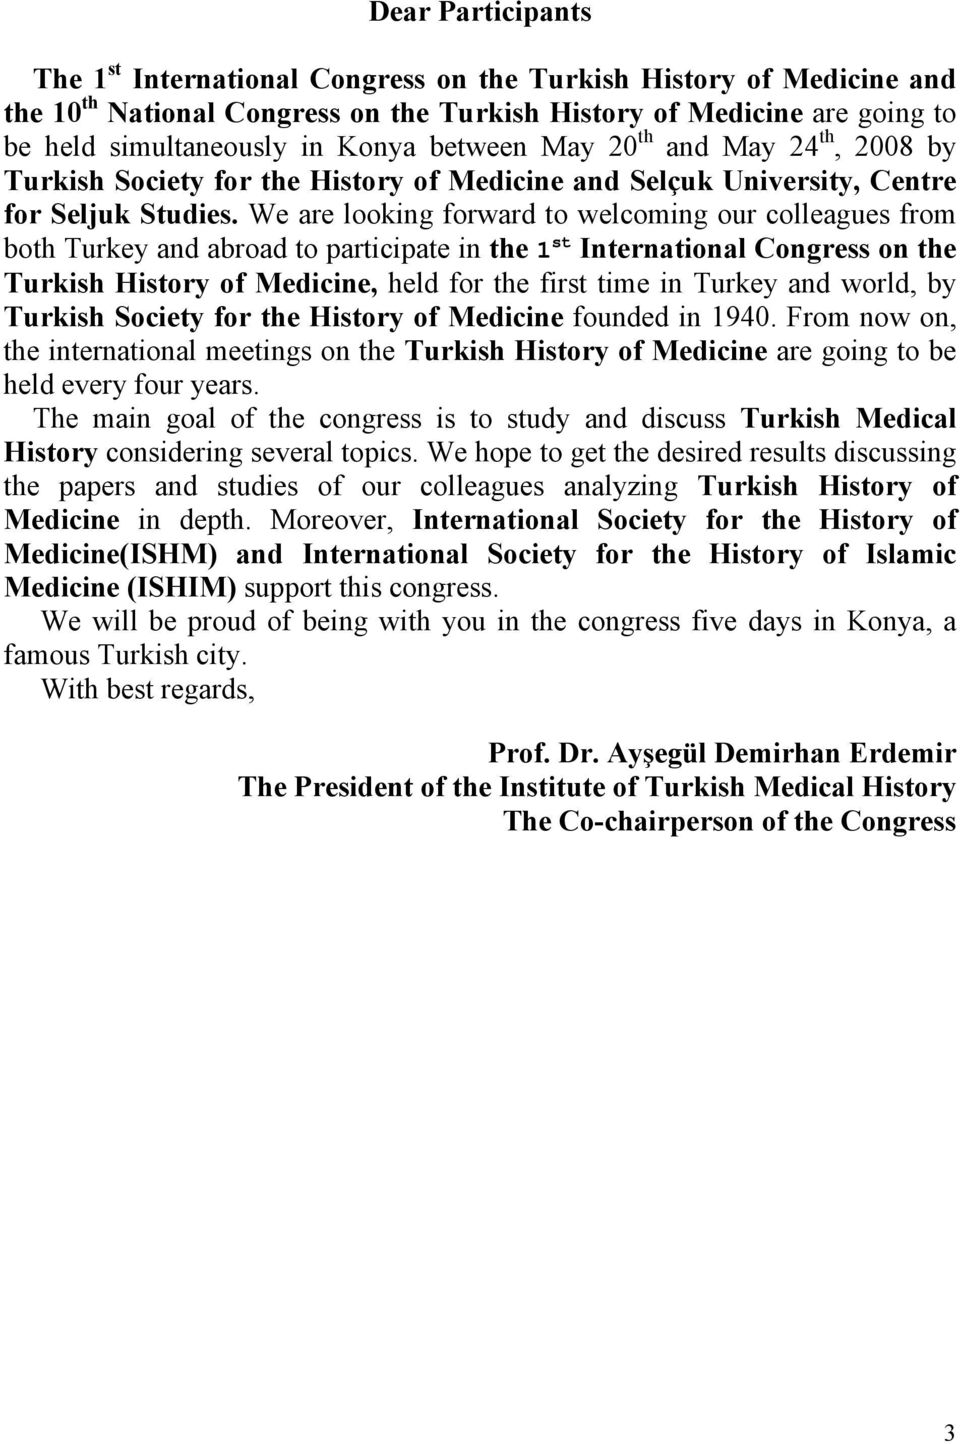 We are looking forward to welcoming our colleagues from both Turkey and abroad to participate in the 1 st International Congress on the Turkish History of Medicine, held for the first time in Turkey